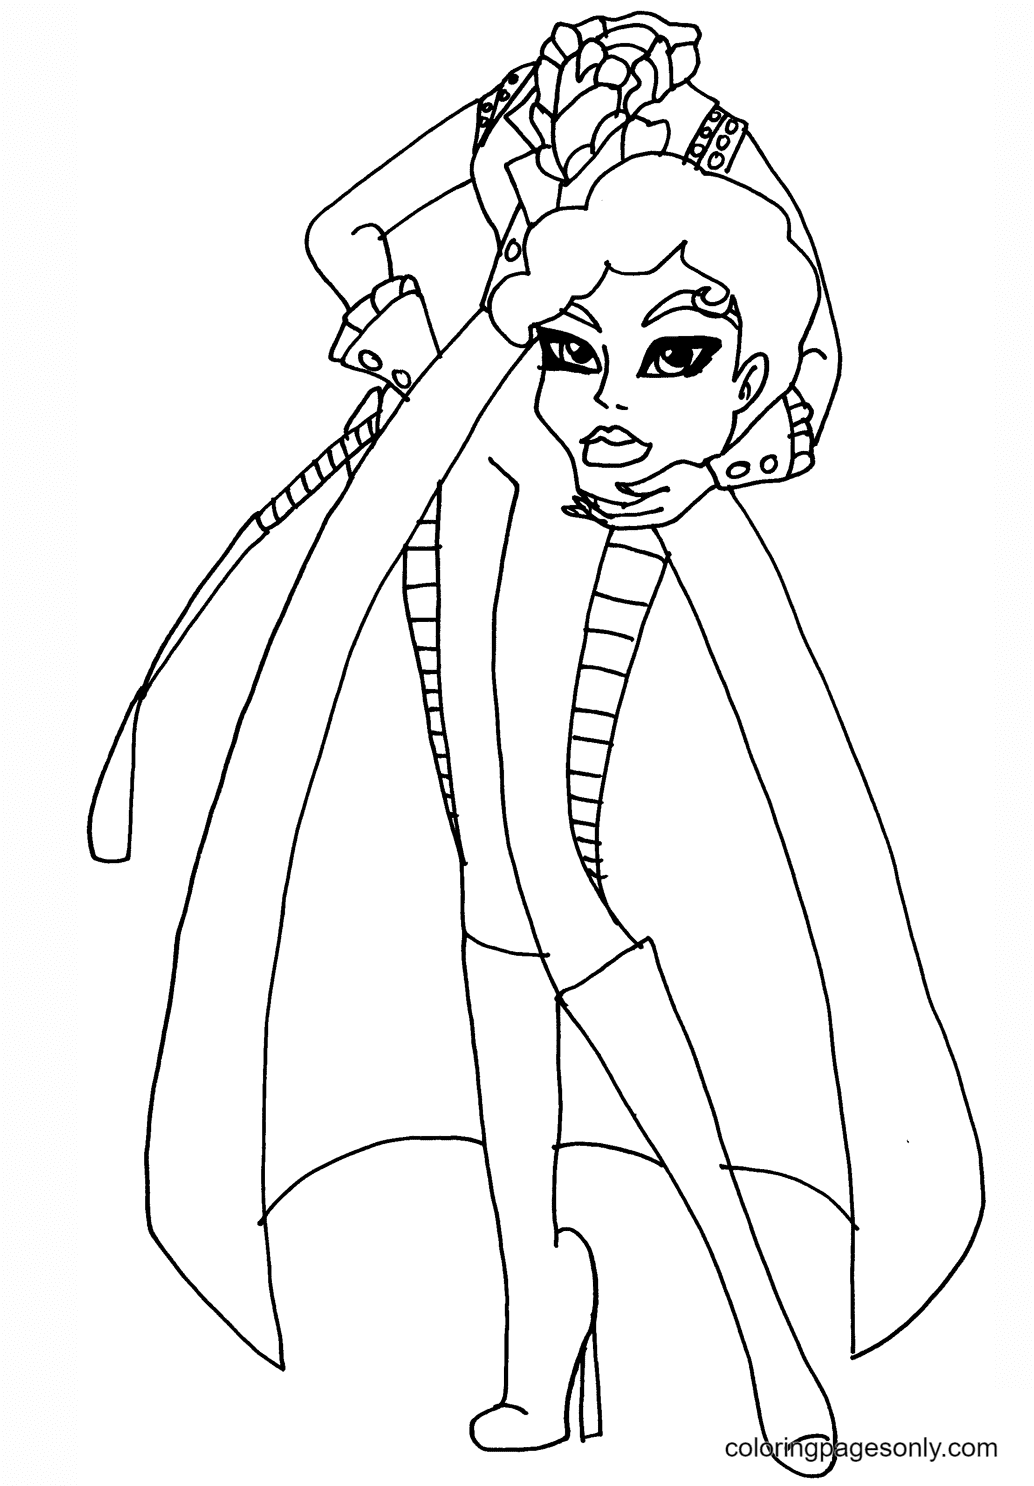 Headless Headmistress Bloodgood Coloring Pages - Monster High Coloring